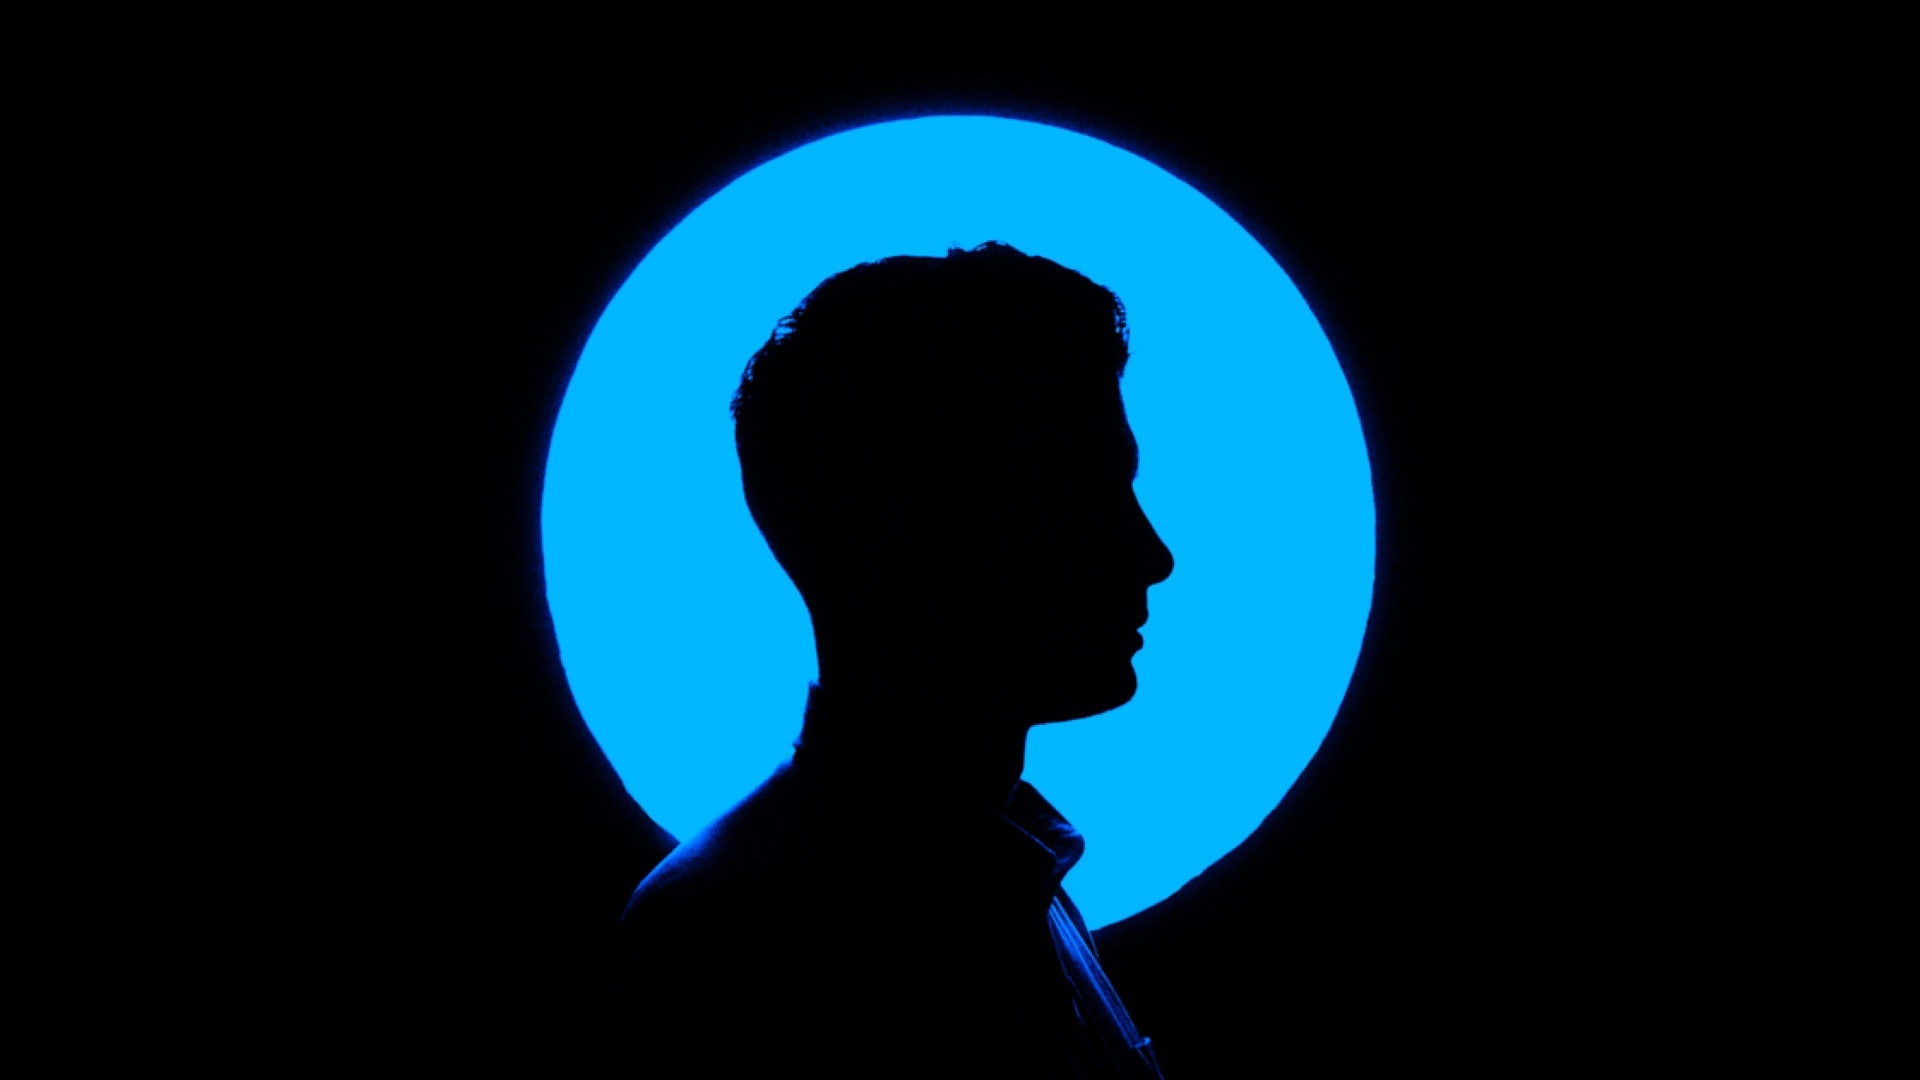 Human Identity Silhouette in Front of Blue Circle